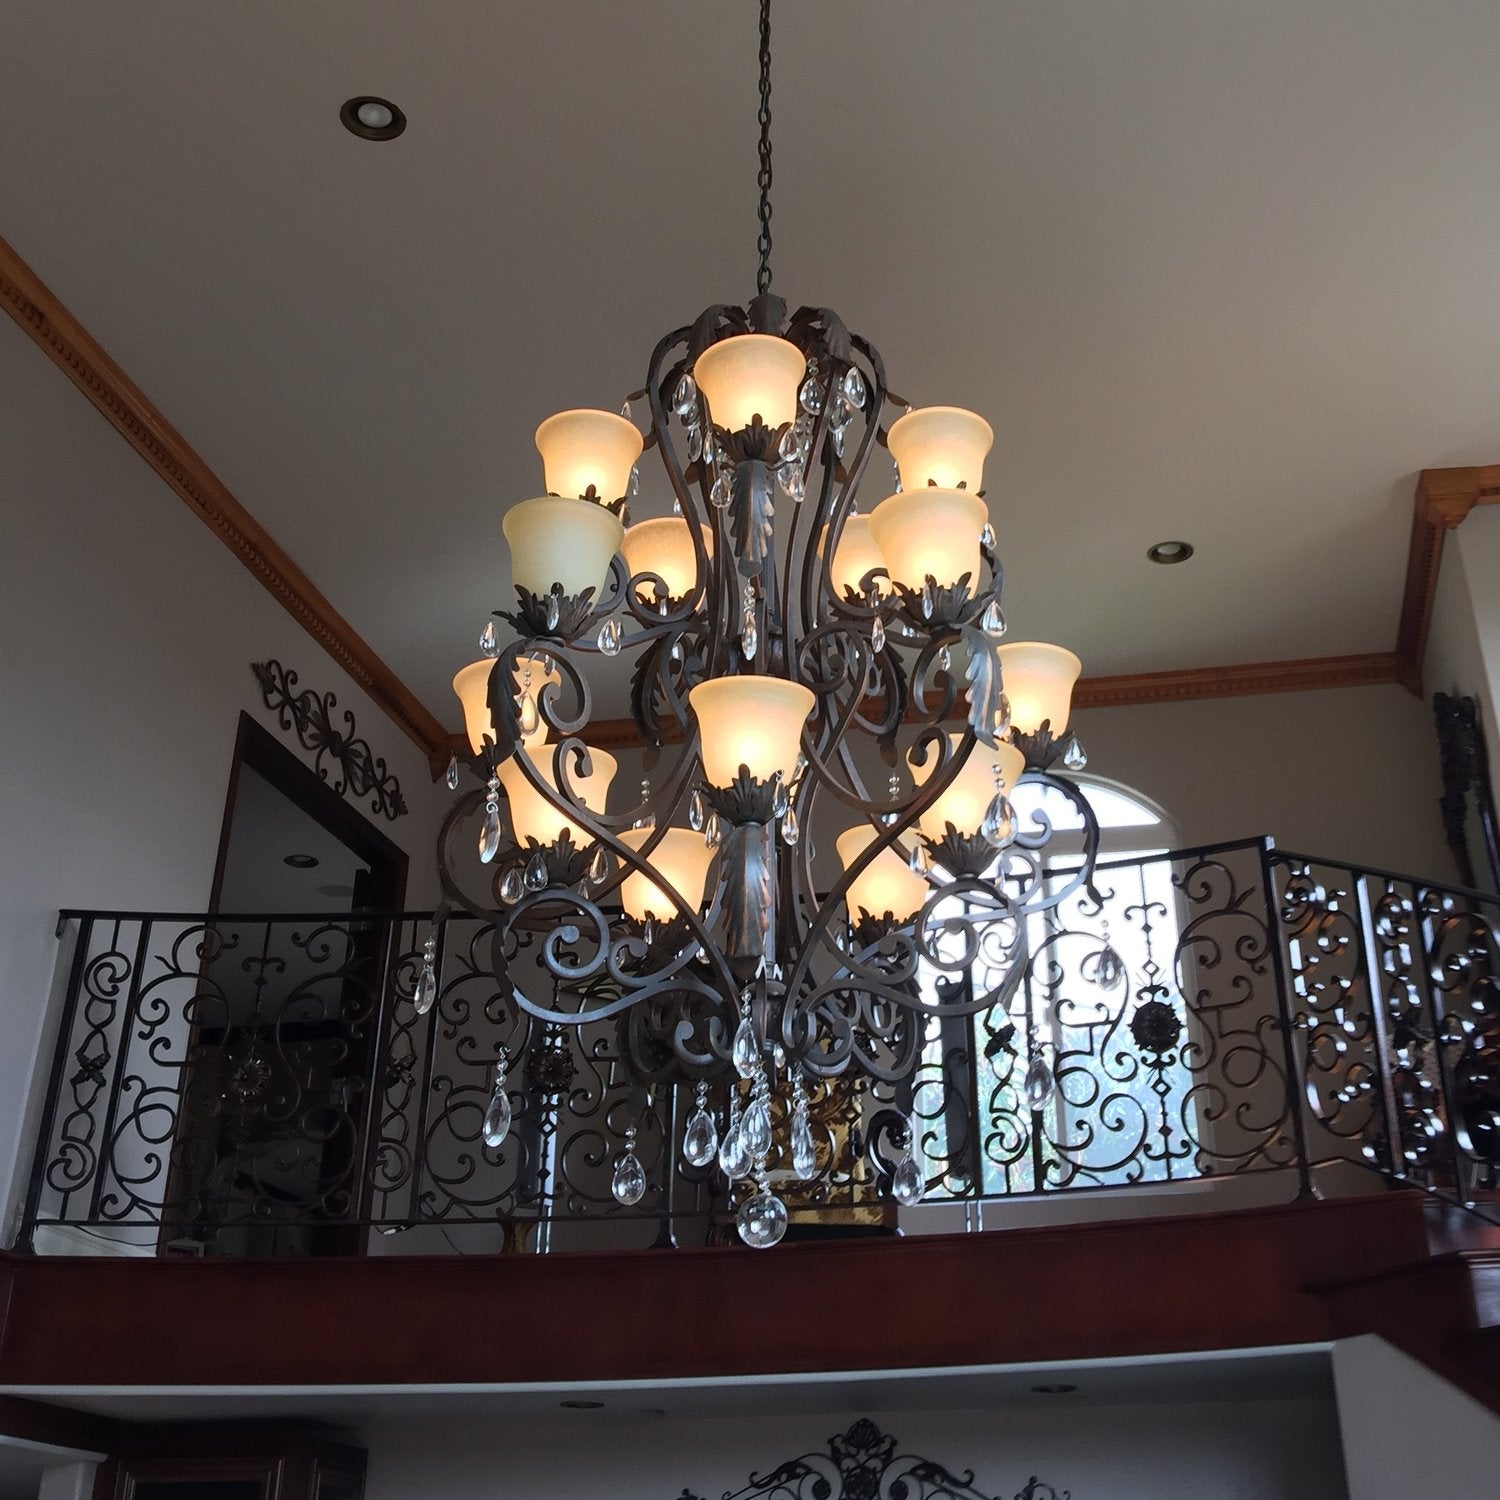 Get a free estimate for the lighting installation of your vintage iron crystal chandelier in California.